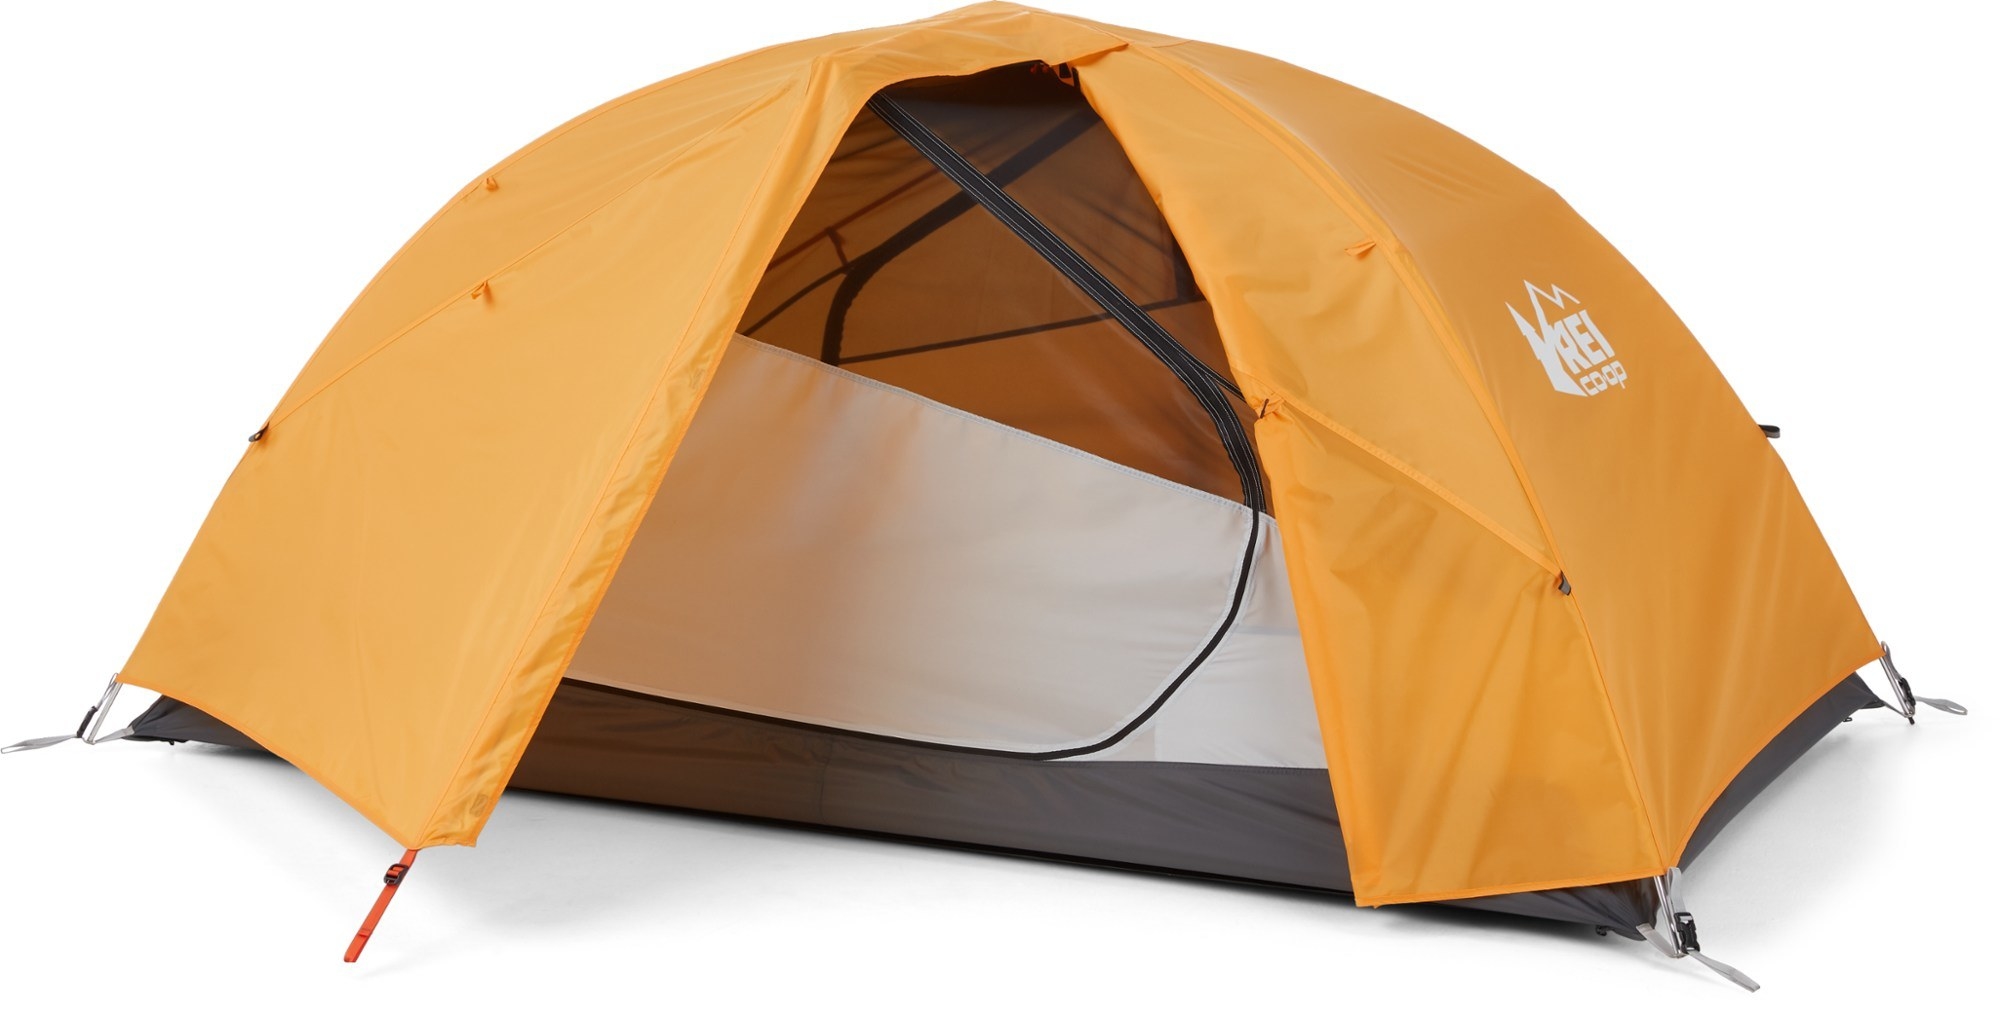 small tent with orange rain fly